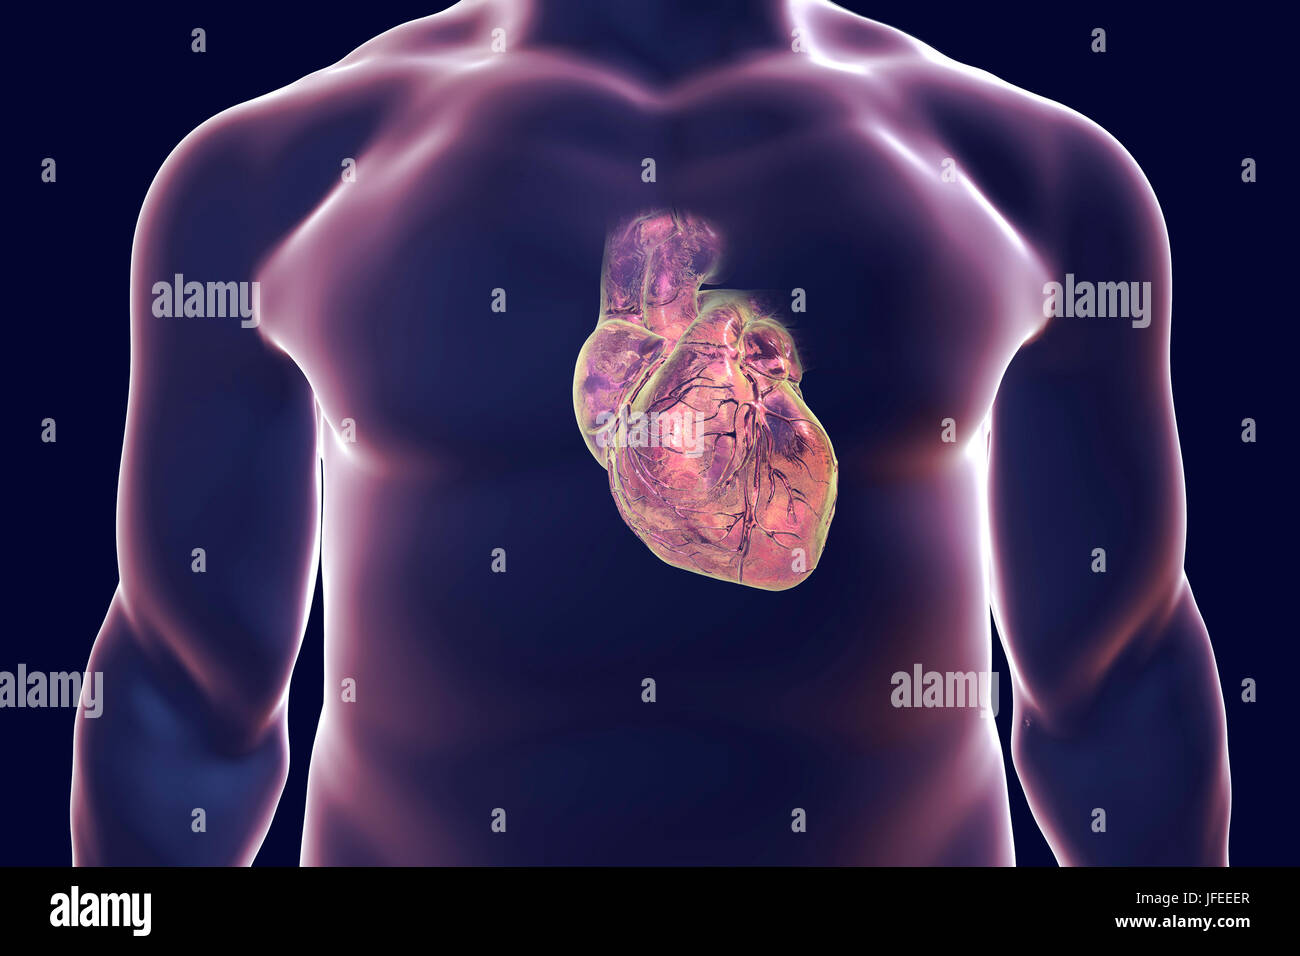 Heart with coronary blood vessels, computer illustration. Stock Photo